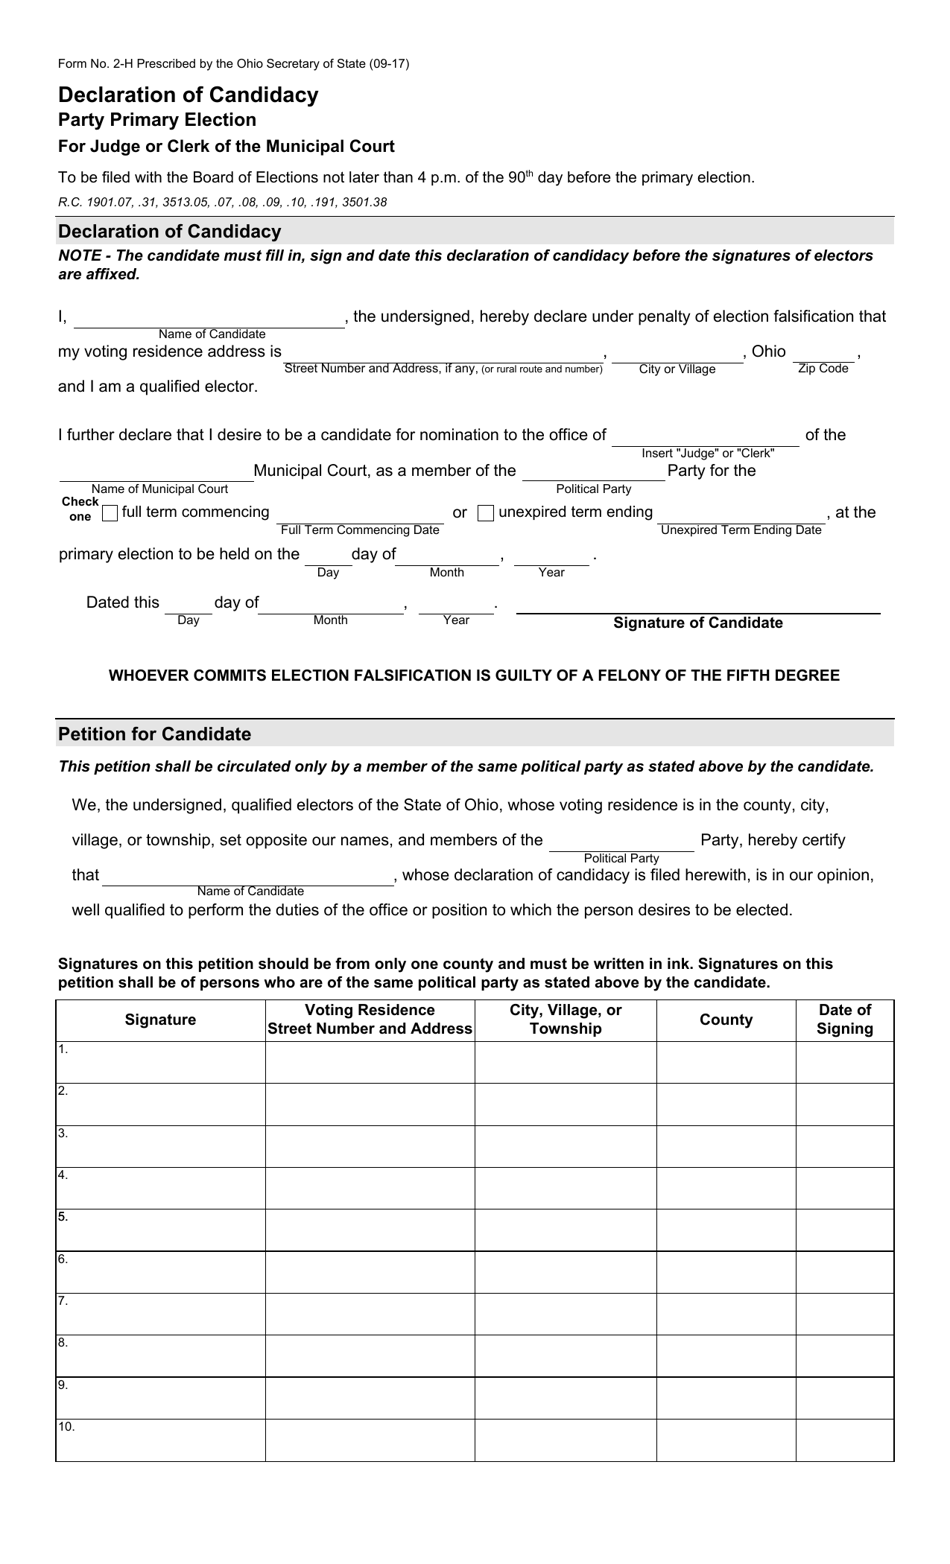 Form 2-H Declaration of Candidacy - Party Primary Election for Judge or Clerk of the Municipal Court - Ohio, Page 1